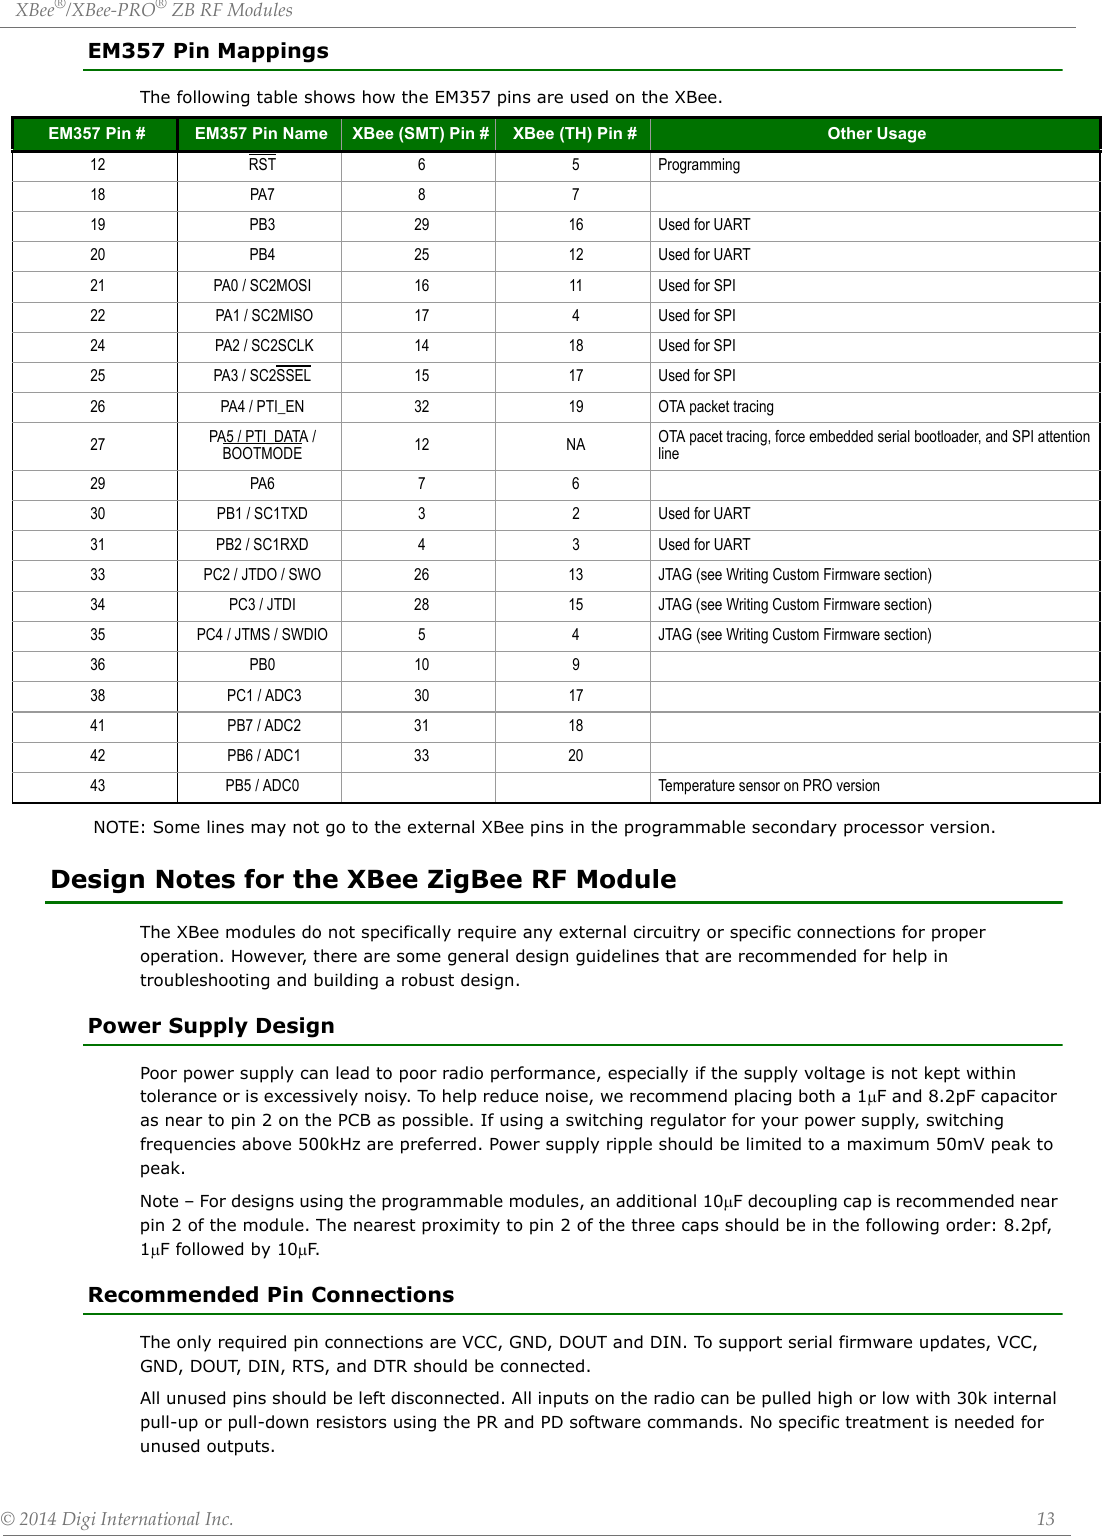 XBee®/XBee‐PRO®ZBRFModules©2014DigiInternationalInc. 13EM357 Pin MappingsThe following table shows how the EM357 pins are used on the XBee. NOTE: Some lines may not go to the external XBee pins in the programmable secondary processor version.Design Notes for the XBee ZigBee RF ModuleThe XBee modules do not specifically require any external circuitry or specific connections for proper operation. However, there are some general design guidelines that are recommended for help in troubleshooting and building a robust design.Power Supply DesignPoor power supply can lead to poor radio performance, especially if the supply voltage is not kept within tolerance or is excessively noisy. To help reduce noise, we recommend placing both a 1F and 8.2pF capacitor as near to pin 2 on the PCB as possible. If using a switching regulator for your power supply, switching frequencies above 500kHz are preferred. Power supply ripple should be limited to a maximum 50mV peak to peak.Note – For designs using the programmable modules, an additional 10F decoupling cap is recommended near pin 2 of the module. The nearest proximity to pin 2 of the three caps should be in the following order: 8.2pf, 1F followed by 10F.Recommended Pin ConnectionsThe only required pin connections are VCC, GND, DOUT and DIN. To support serial firmware updates, VCC, GND, DOUT, DIN, RTS, and DTR should be connected.All unused pins should be left disconnected. All inputs on the radio can be pulled high or low with 30k internal pull-up or pull-down resistors using the PR and PD software commands. No specific treatment is needed for unused outputs.EM357 Pin # EM357 Pin Name XBee (SMT) Pin # XBee (TH) Pin # Other Usage12 RST 6 5 Programming18 PA7 8 719 PB3 29 16 Used for UART20 PB4 25 12 Used for UART21 PA0 / SC2MOSI 16 11 Used for SPI22  PA1 / SC2MISO 17 4 Used for SPI24  PA2 / SC2SCLK 14 18 Used for SPI25 PA3 / SC2SSEL 15 17 Used for SPI26 PA4 / PTI_EN 32 19 OTA packet tracing27 PA5 / PTI_DATA / BOOTMODE 12 NA OTA pacet tracing, force embedded serial bootloader, and SPI attention line29 PA6 7 630 PB1 / SC1TXD 3 2 Used for UART31 PB2 / SC1RXD 4 3 Used for UART33 PC2 / JTDO / SWO 26 13 JTAG (see Writing Custom Firmware section)34 PC3 / JTDI 28 15 JTAG (see Writing Custom Firmware section)35 PC4 / JTMS / SWDIO 5 4 JTAG (see Writing Custom Firmware section)36 PB0 10 938  PC1 / ADC3 30 1741  PB7 / ADC2 31 1842  PB6 / ADC1 33 2043 PB5 / ADC0 Temperature sensor on PRO version